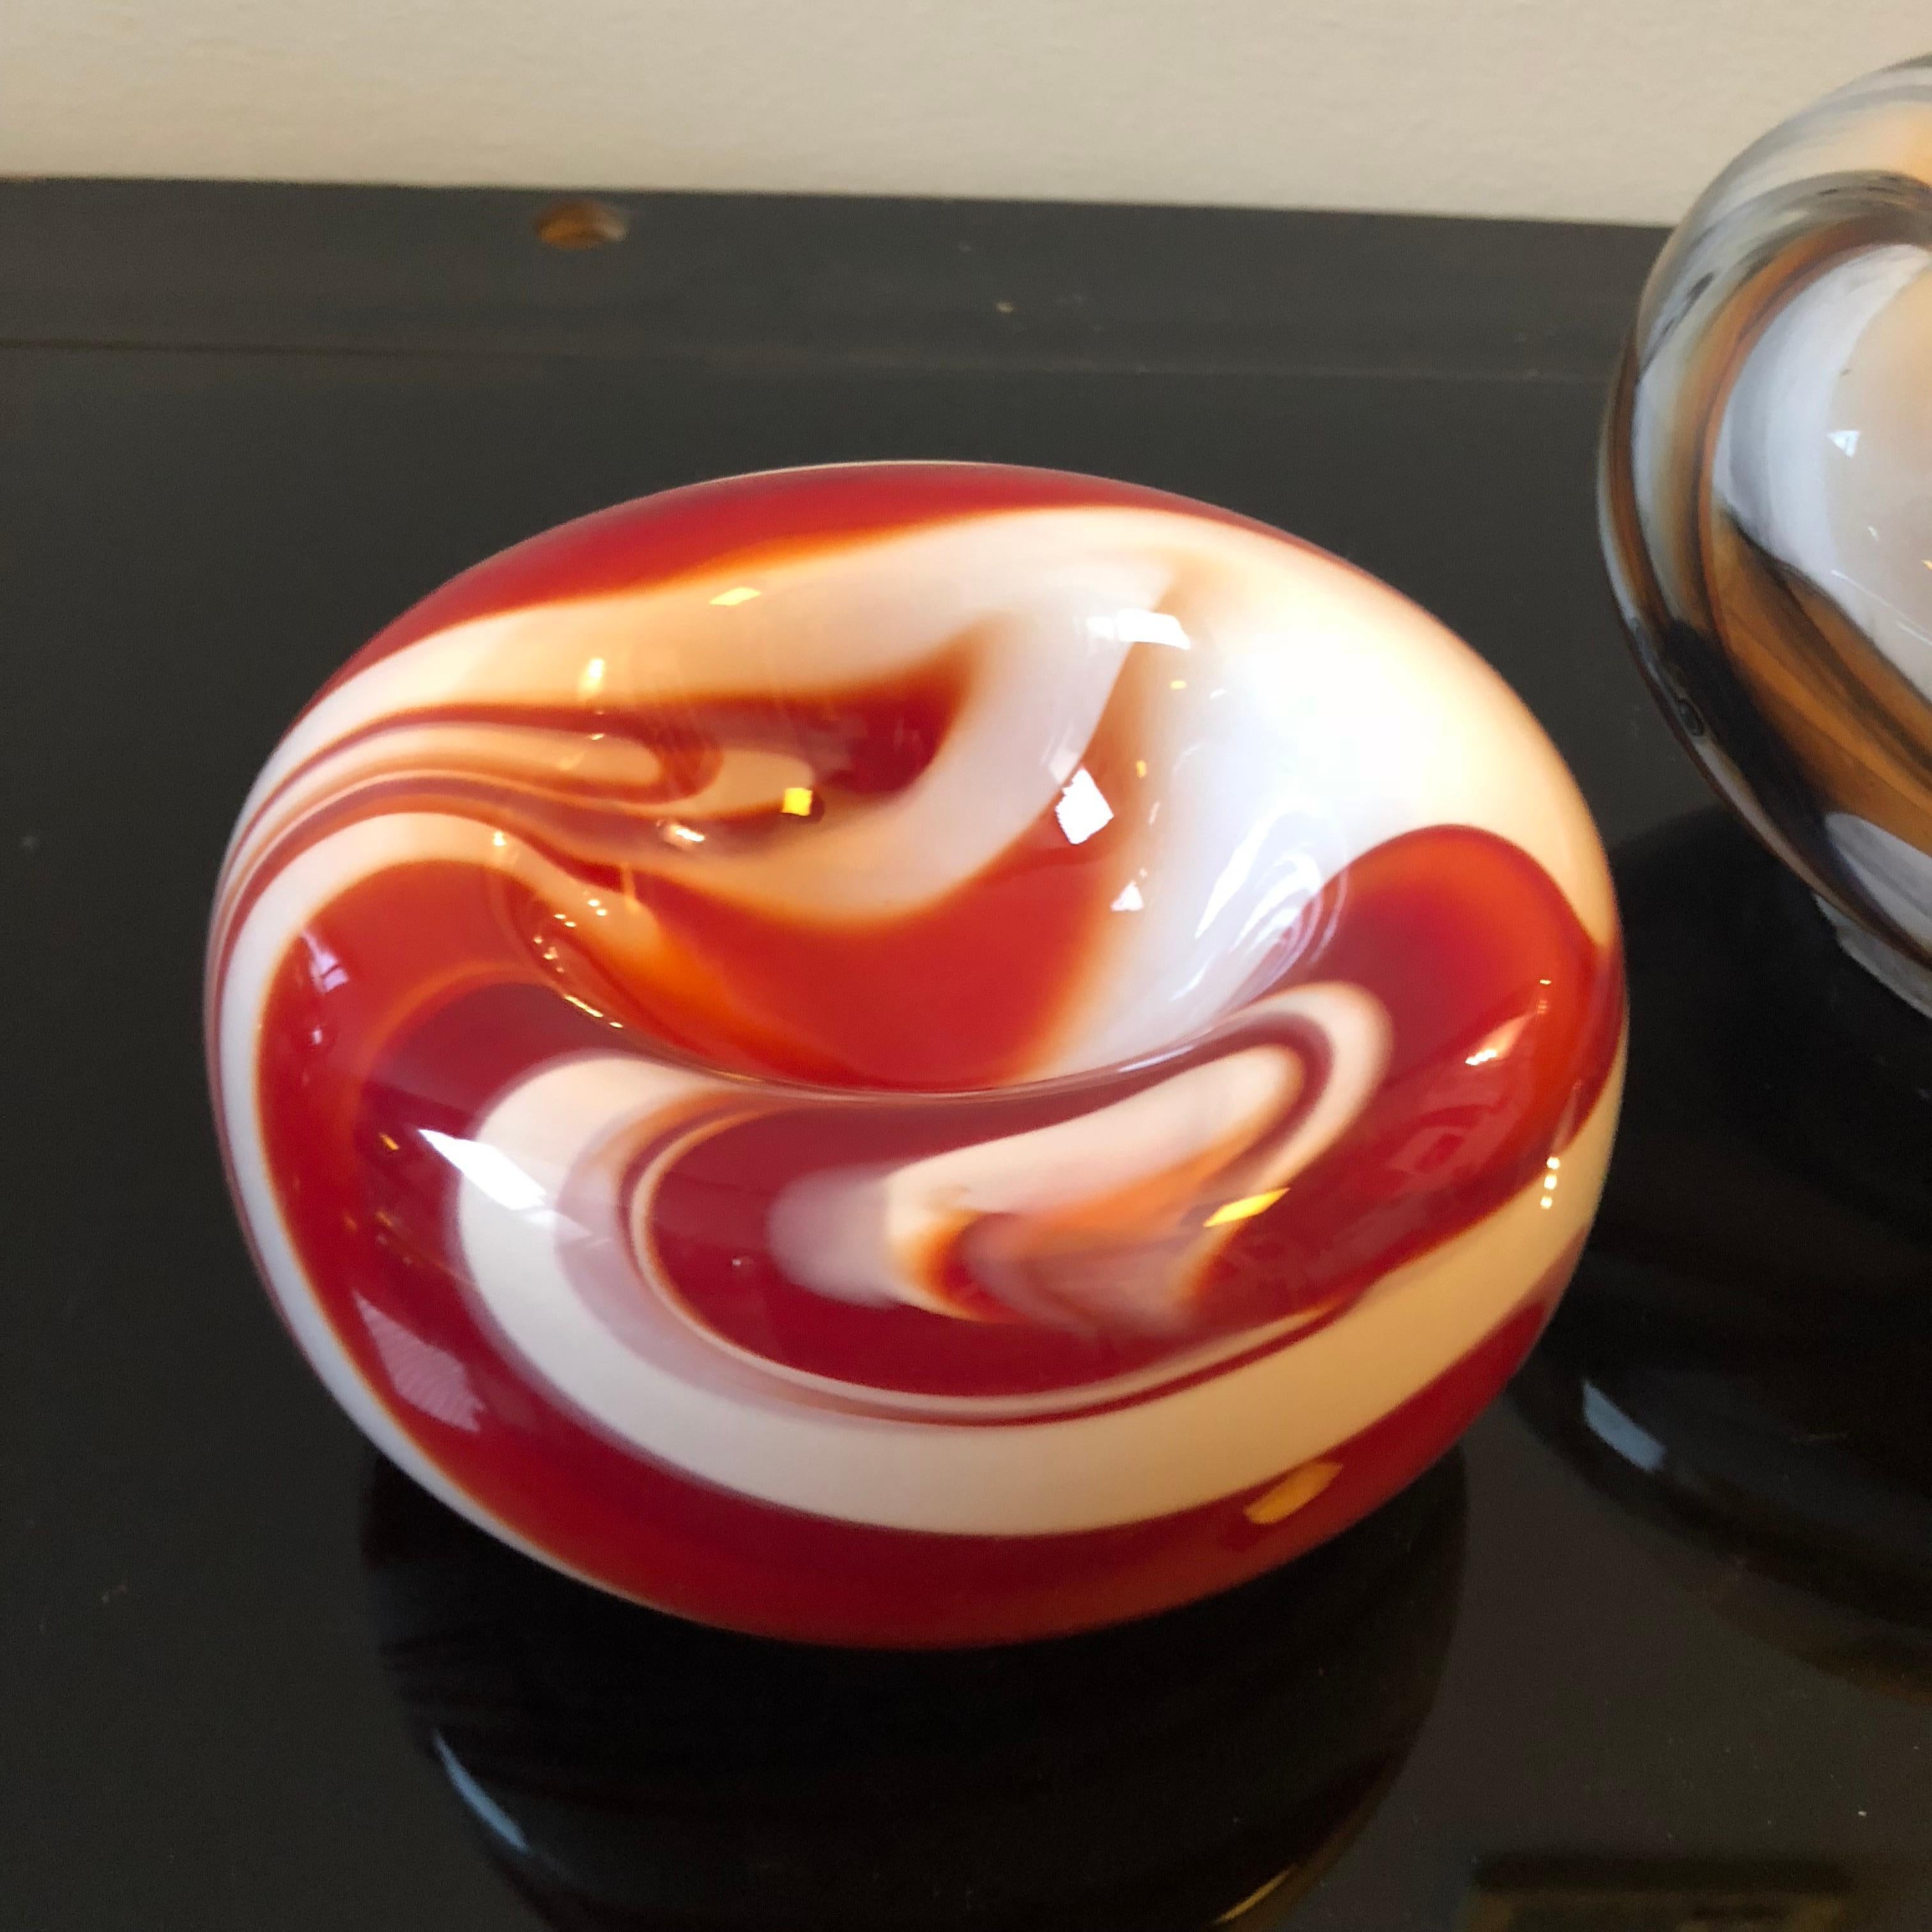 Set of two white, red and brown opaline ashtrays designed by Carlo Moretti for Opaline Florence in perfect conditions.
Biggest ashtray size is height cm 10 and diameter cm 16.